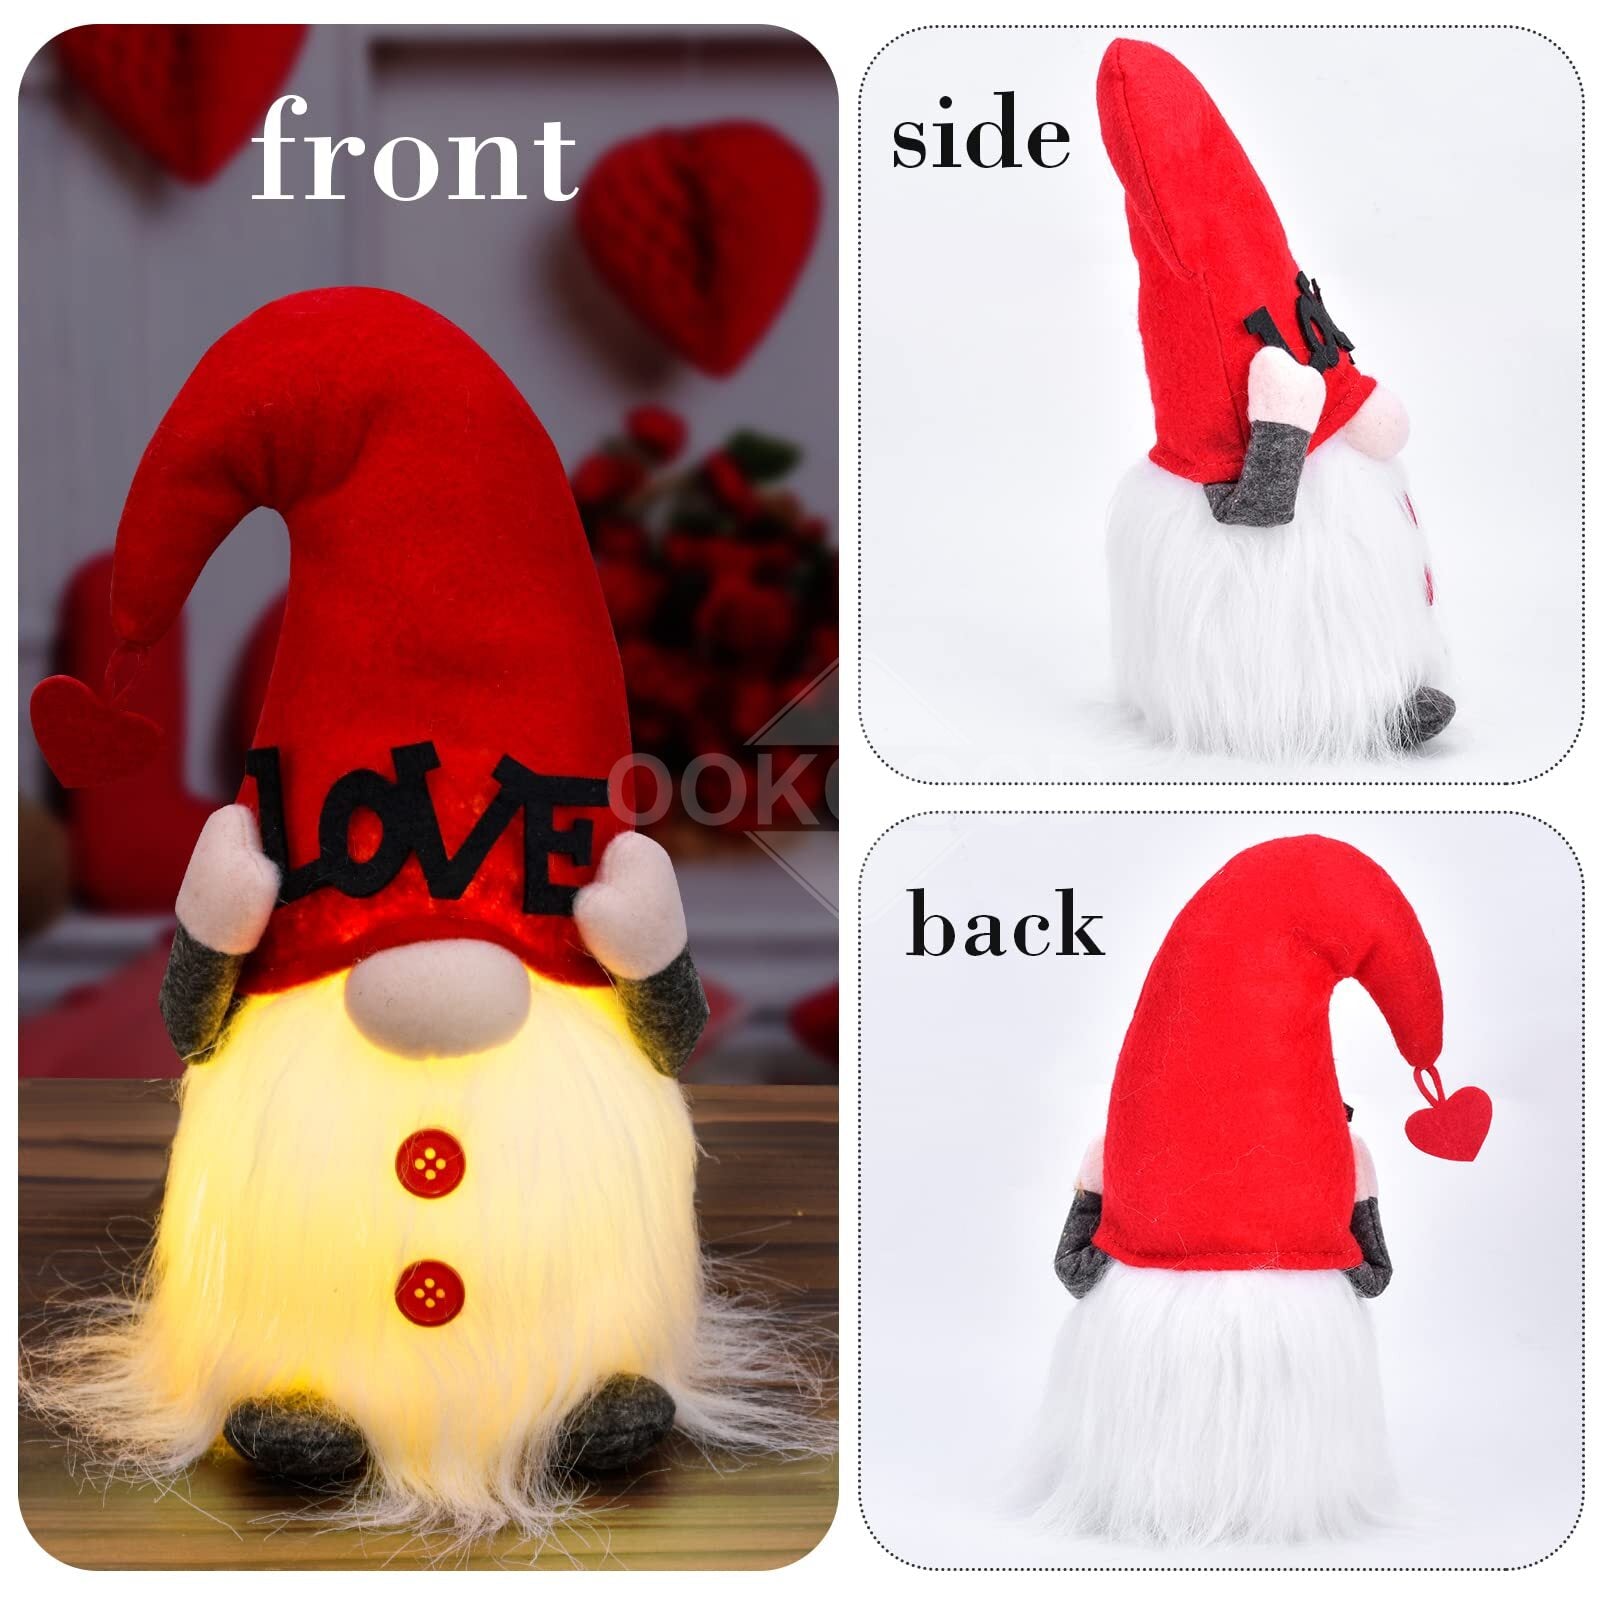 [1 left]Loving Your Kiss - Adorable Gnome Couple With LED Lights